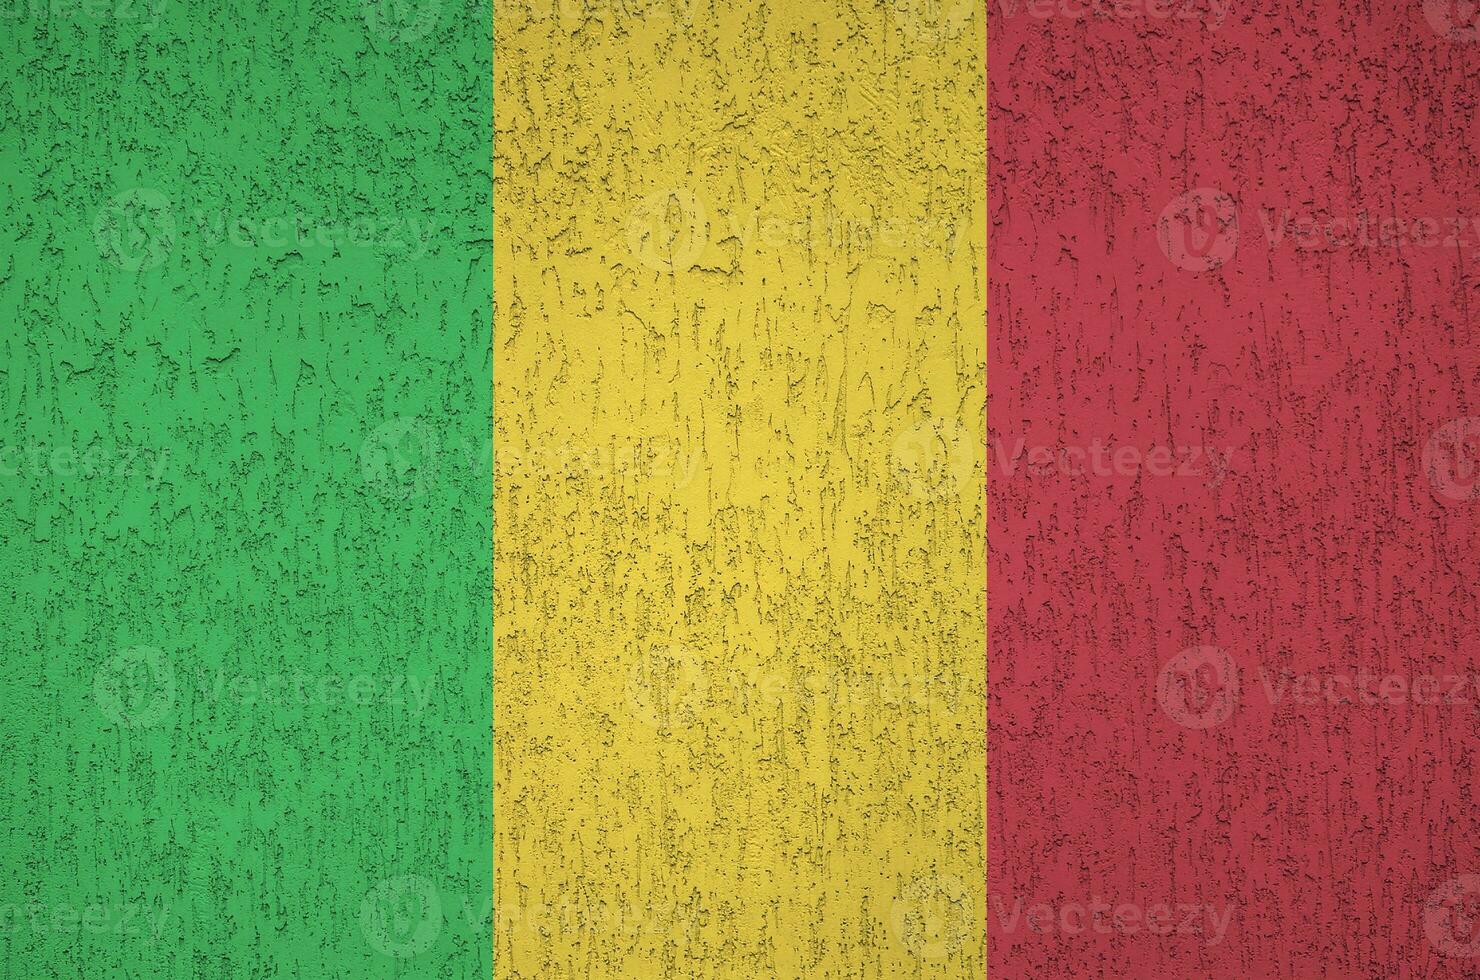 Mali flag depicted in bright paint colors on old relief plastering wall. Textured banner on rough background photo